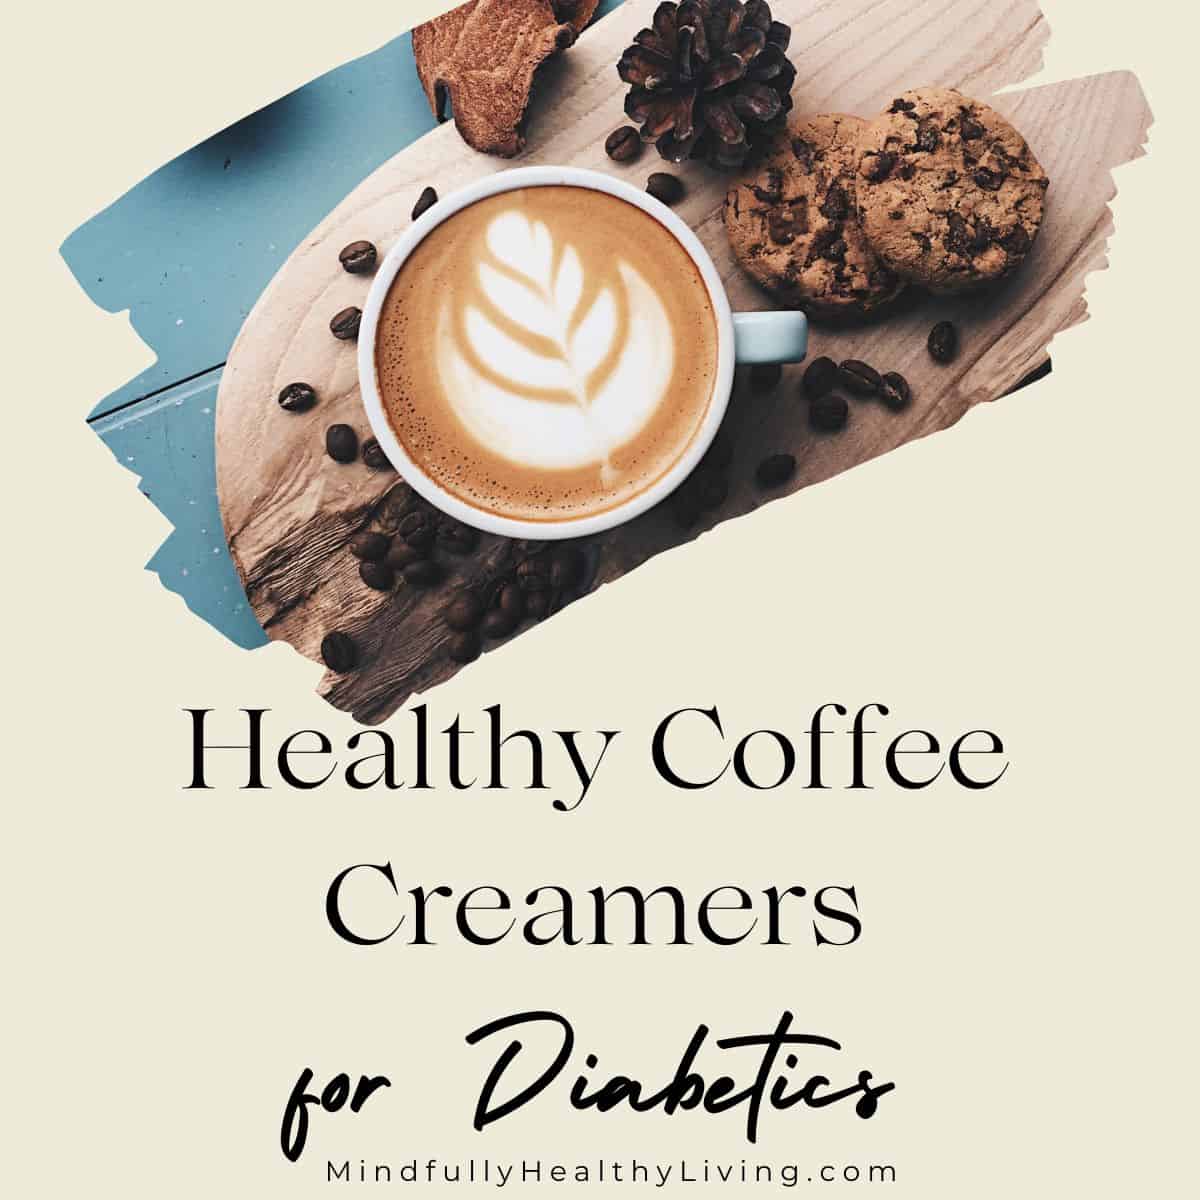 A photo with a cup of coffee with creamer decoratively placed and frothed surrounded by coffee bean and chocolate chip cookies. in a paintbrush effect frame. Underneath it says Healthy Coffee Creamers for Diabetics MindfullyHealthyLiving.com